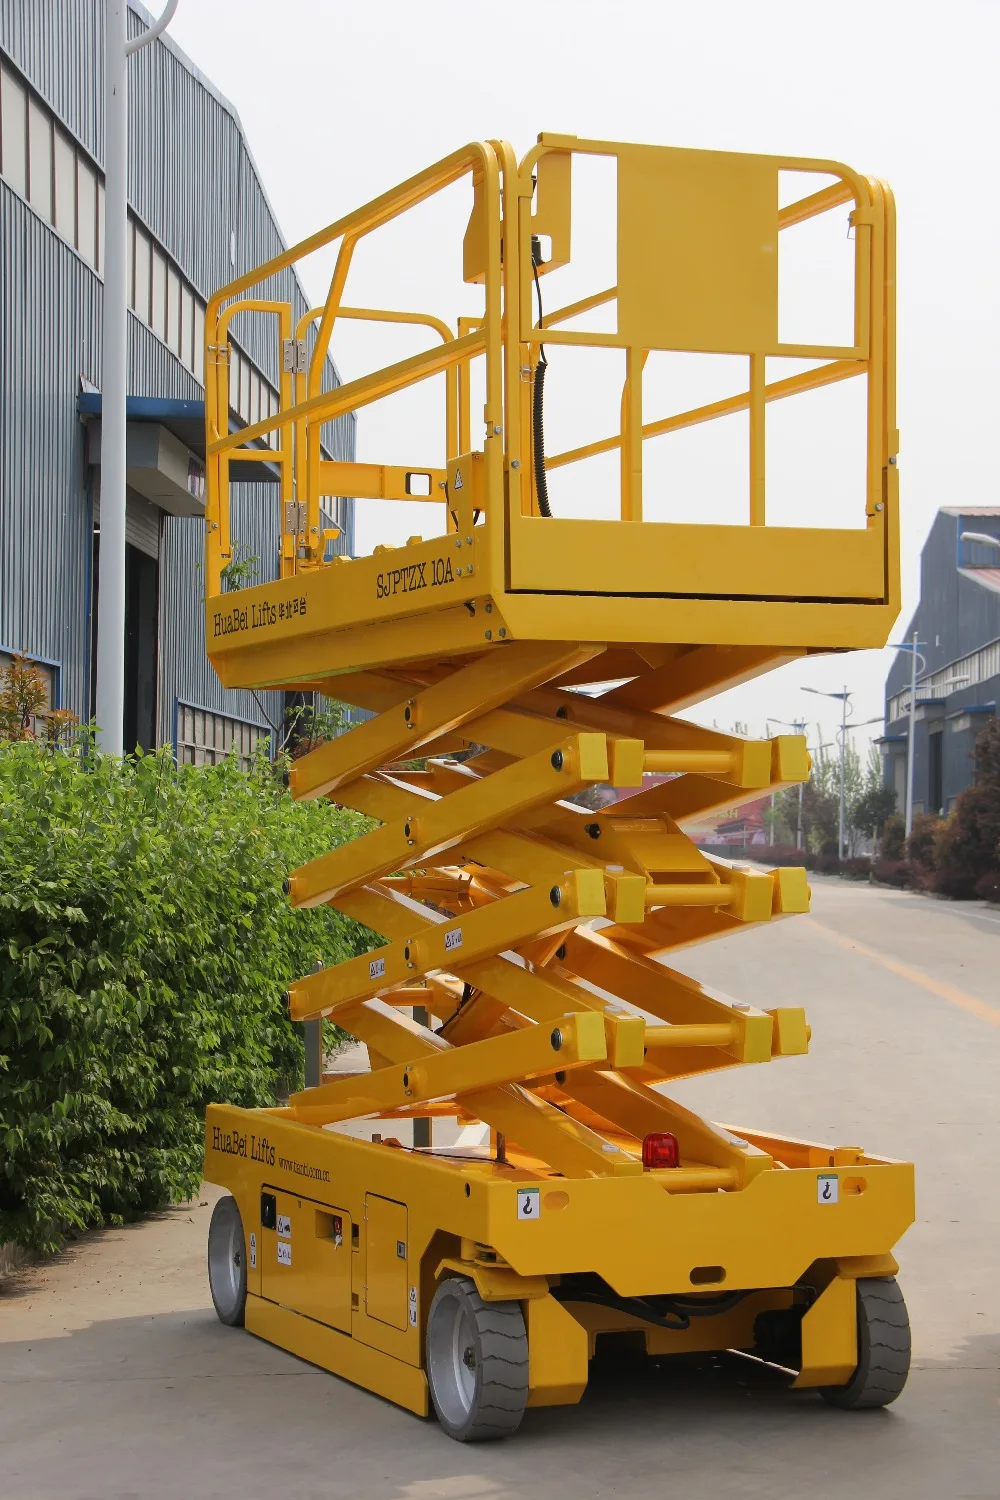 Small automatic articulating manlift aerial lift bucket